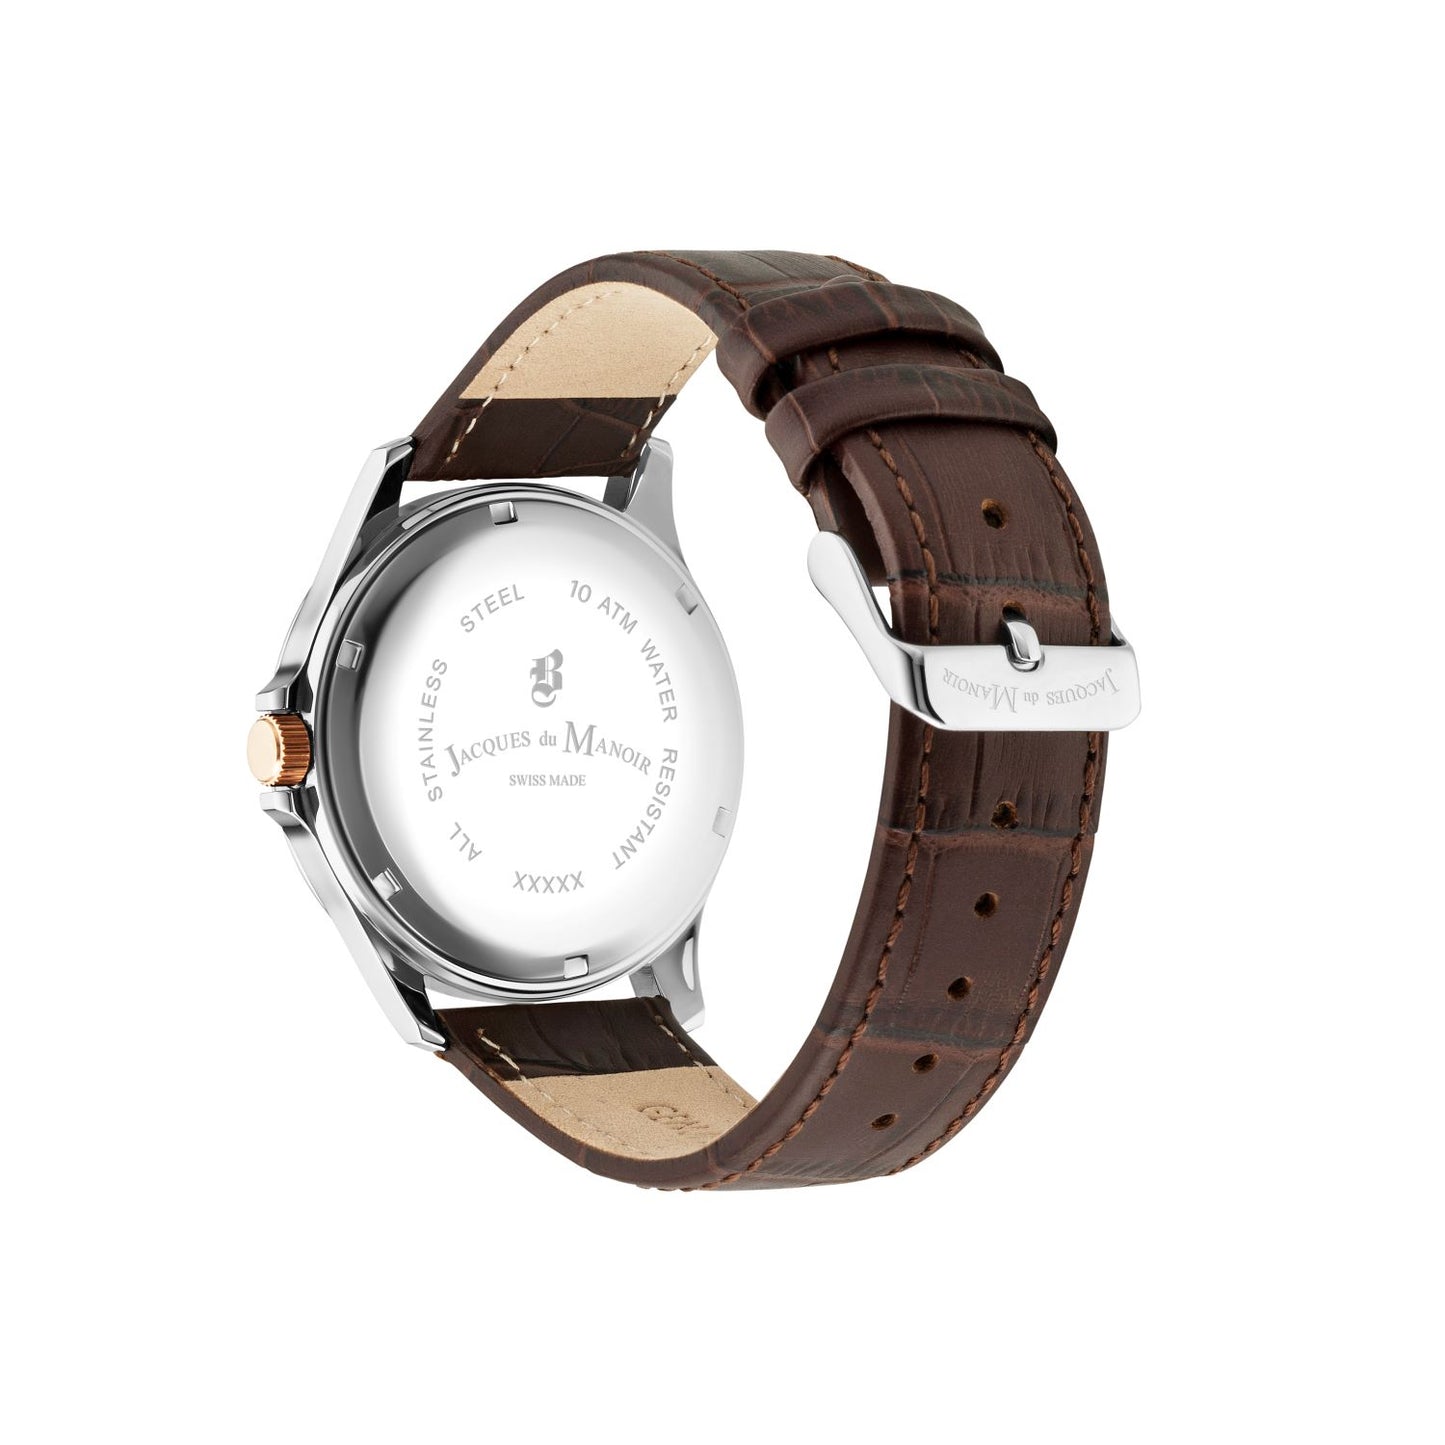 JDM Military Alpha I White Dial Brown Leather Strap